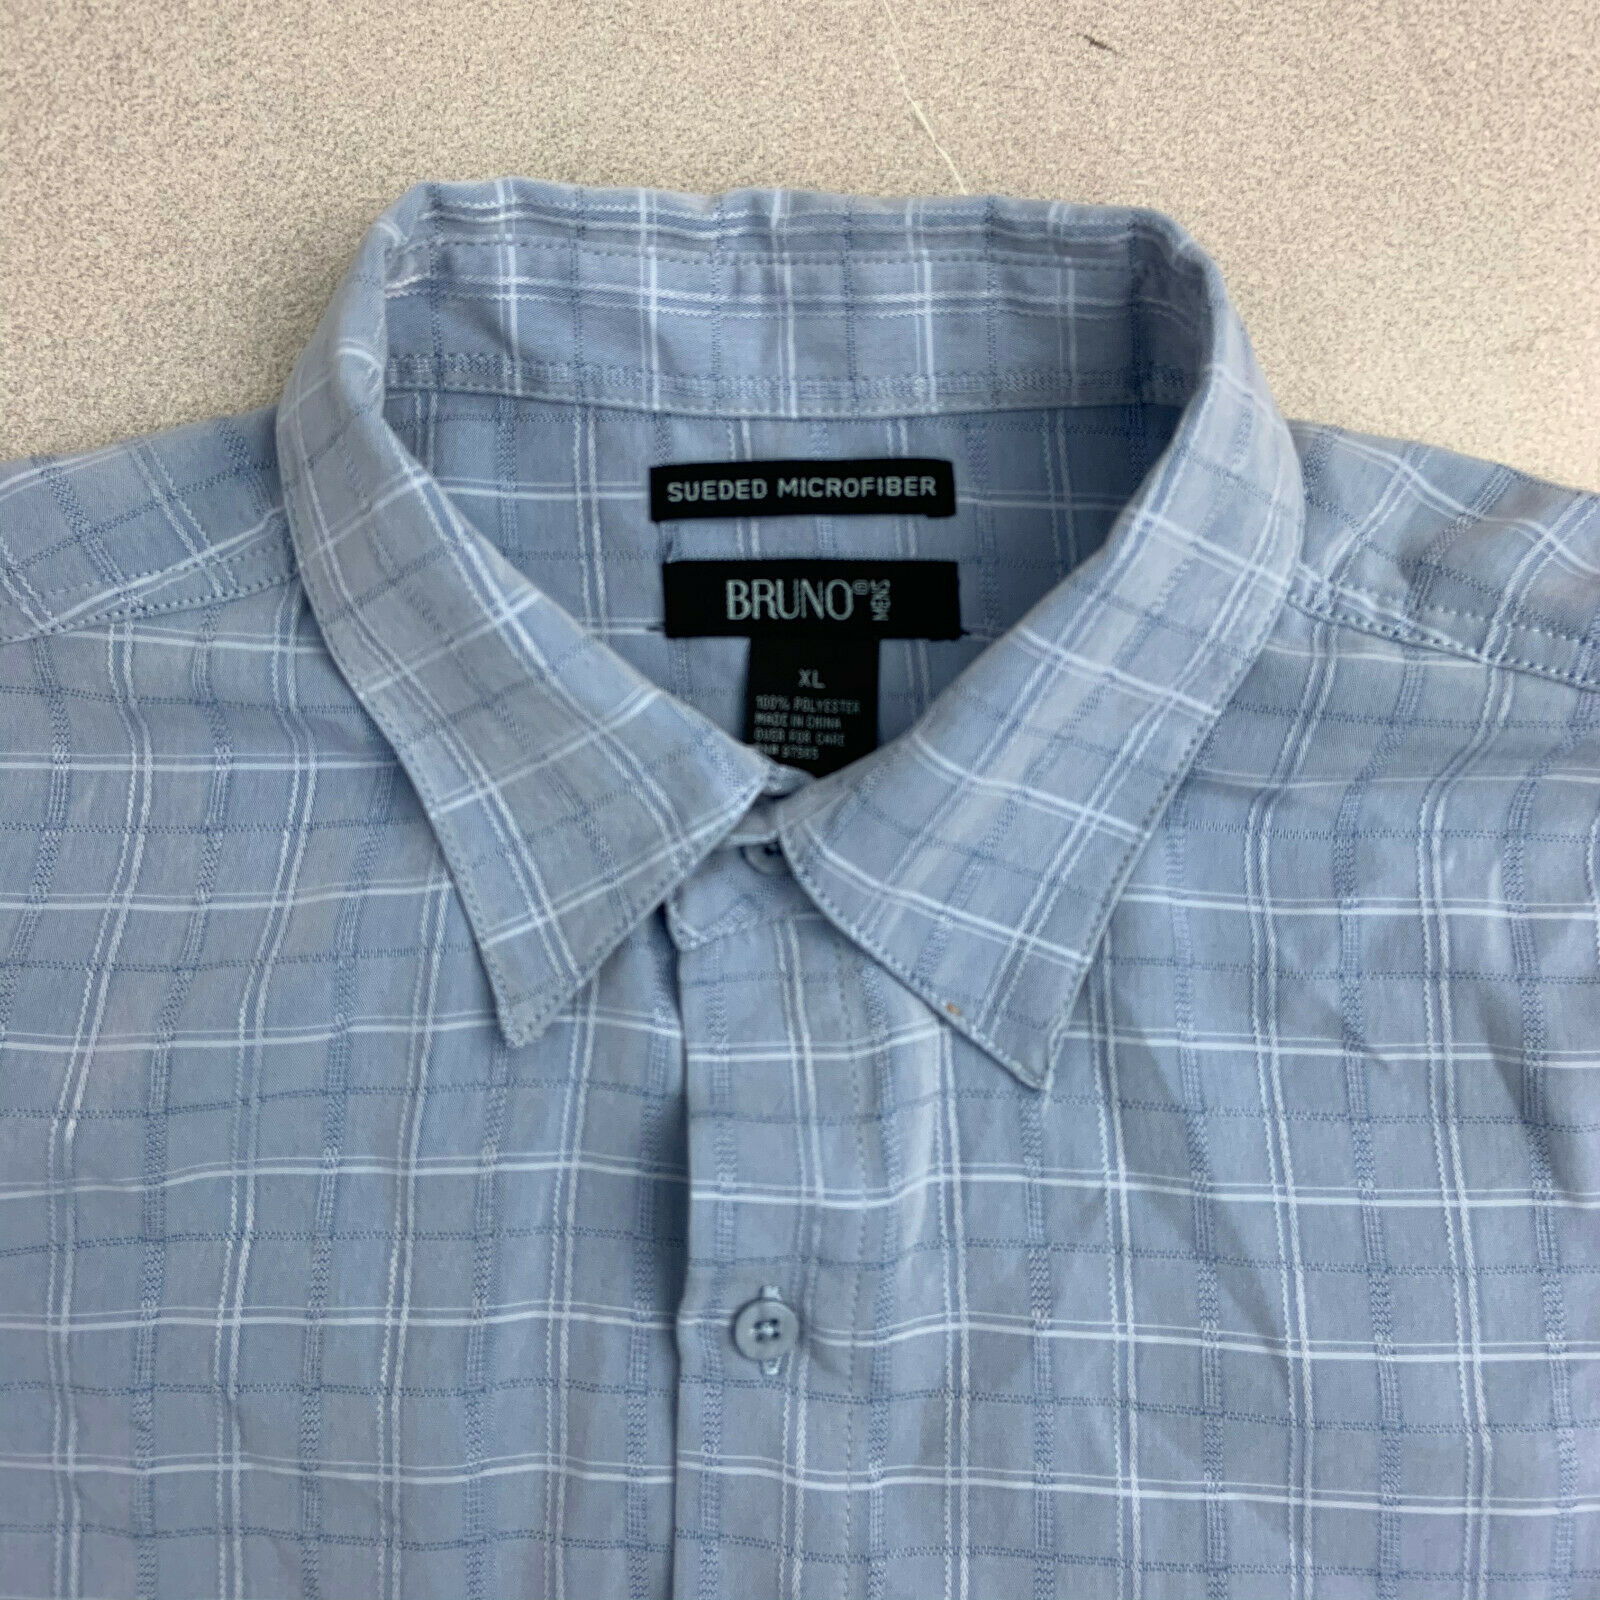 Bruno Sueded Microfiber Button Up Shirt Mens XL Short Sleeve Blue Check ...